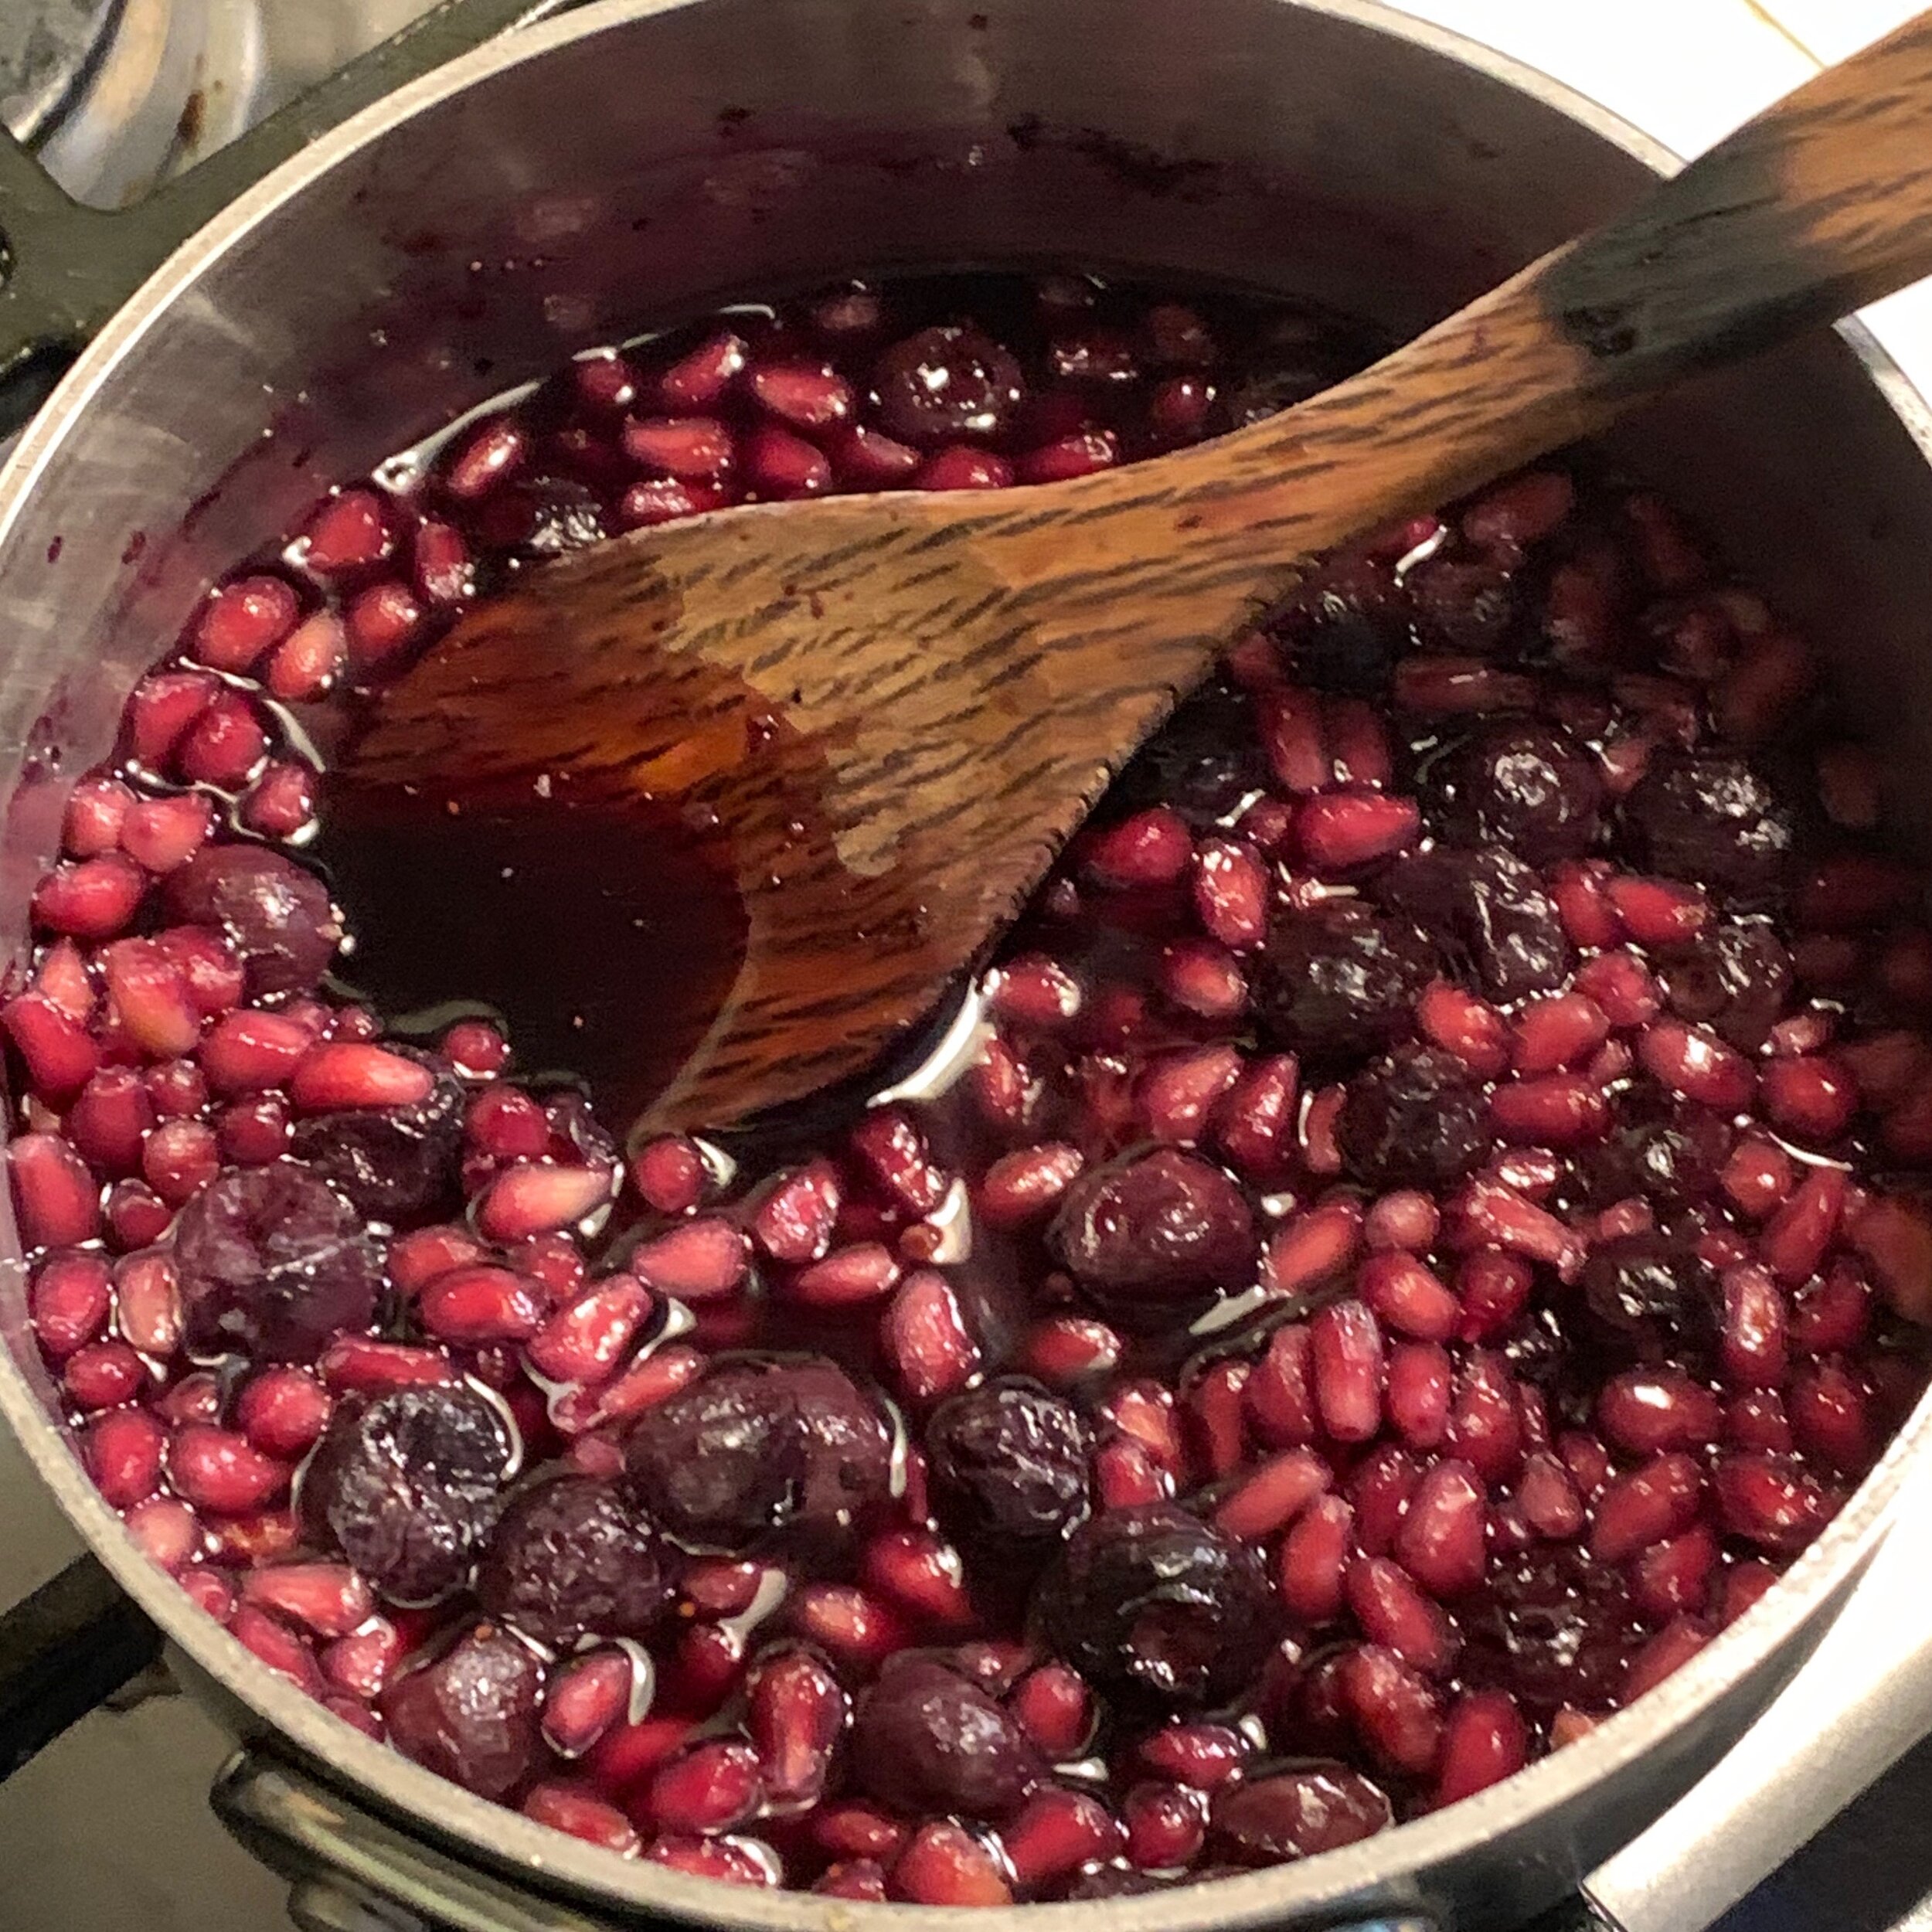 add a cup full of blueberries, maples syrup to taste and heat gently